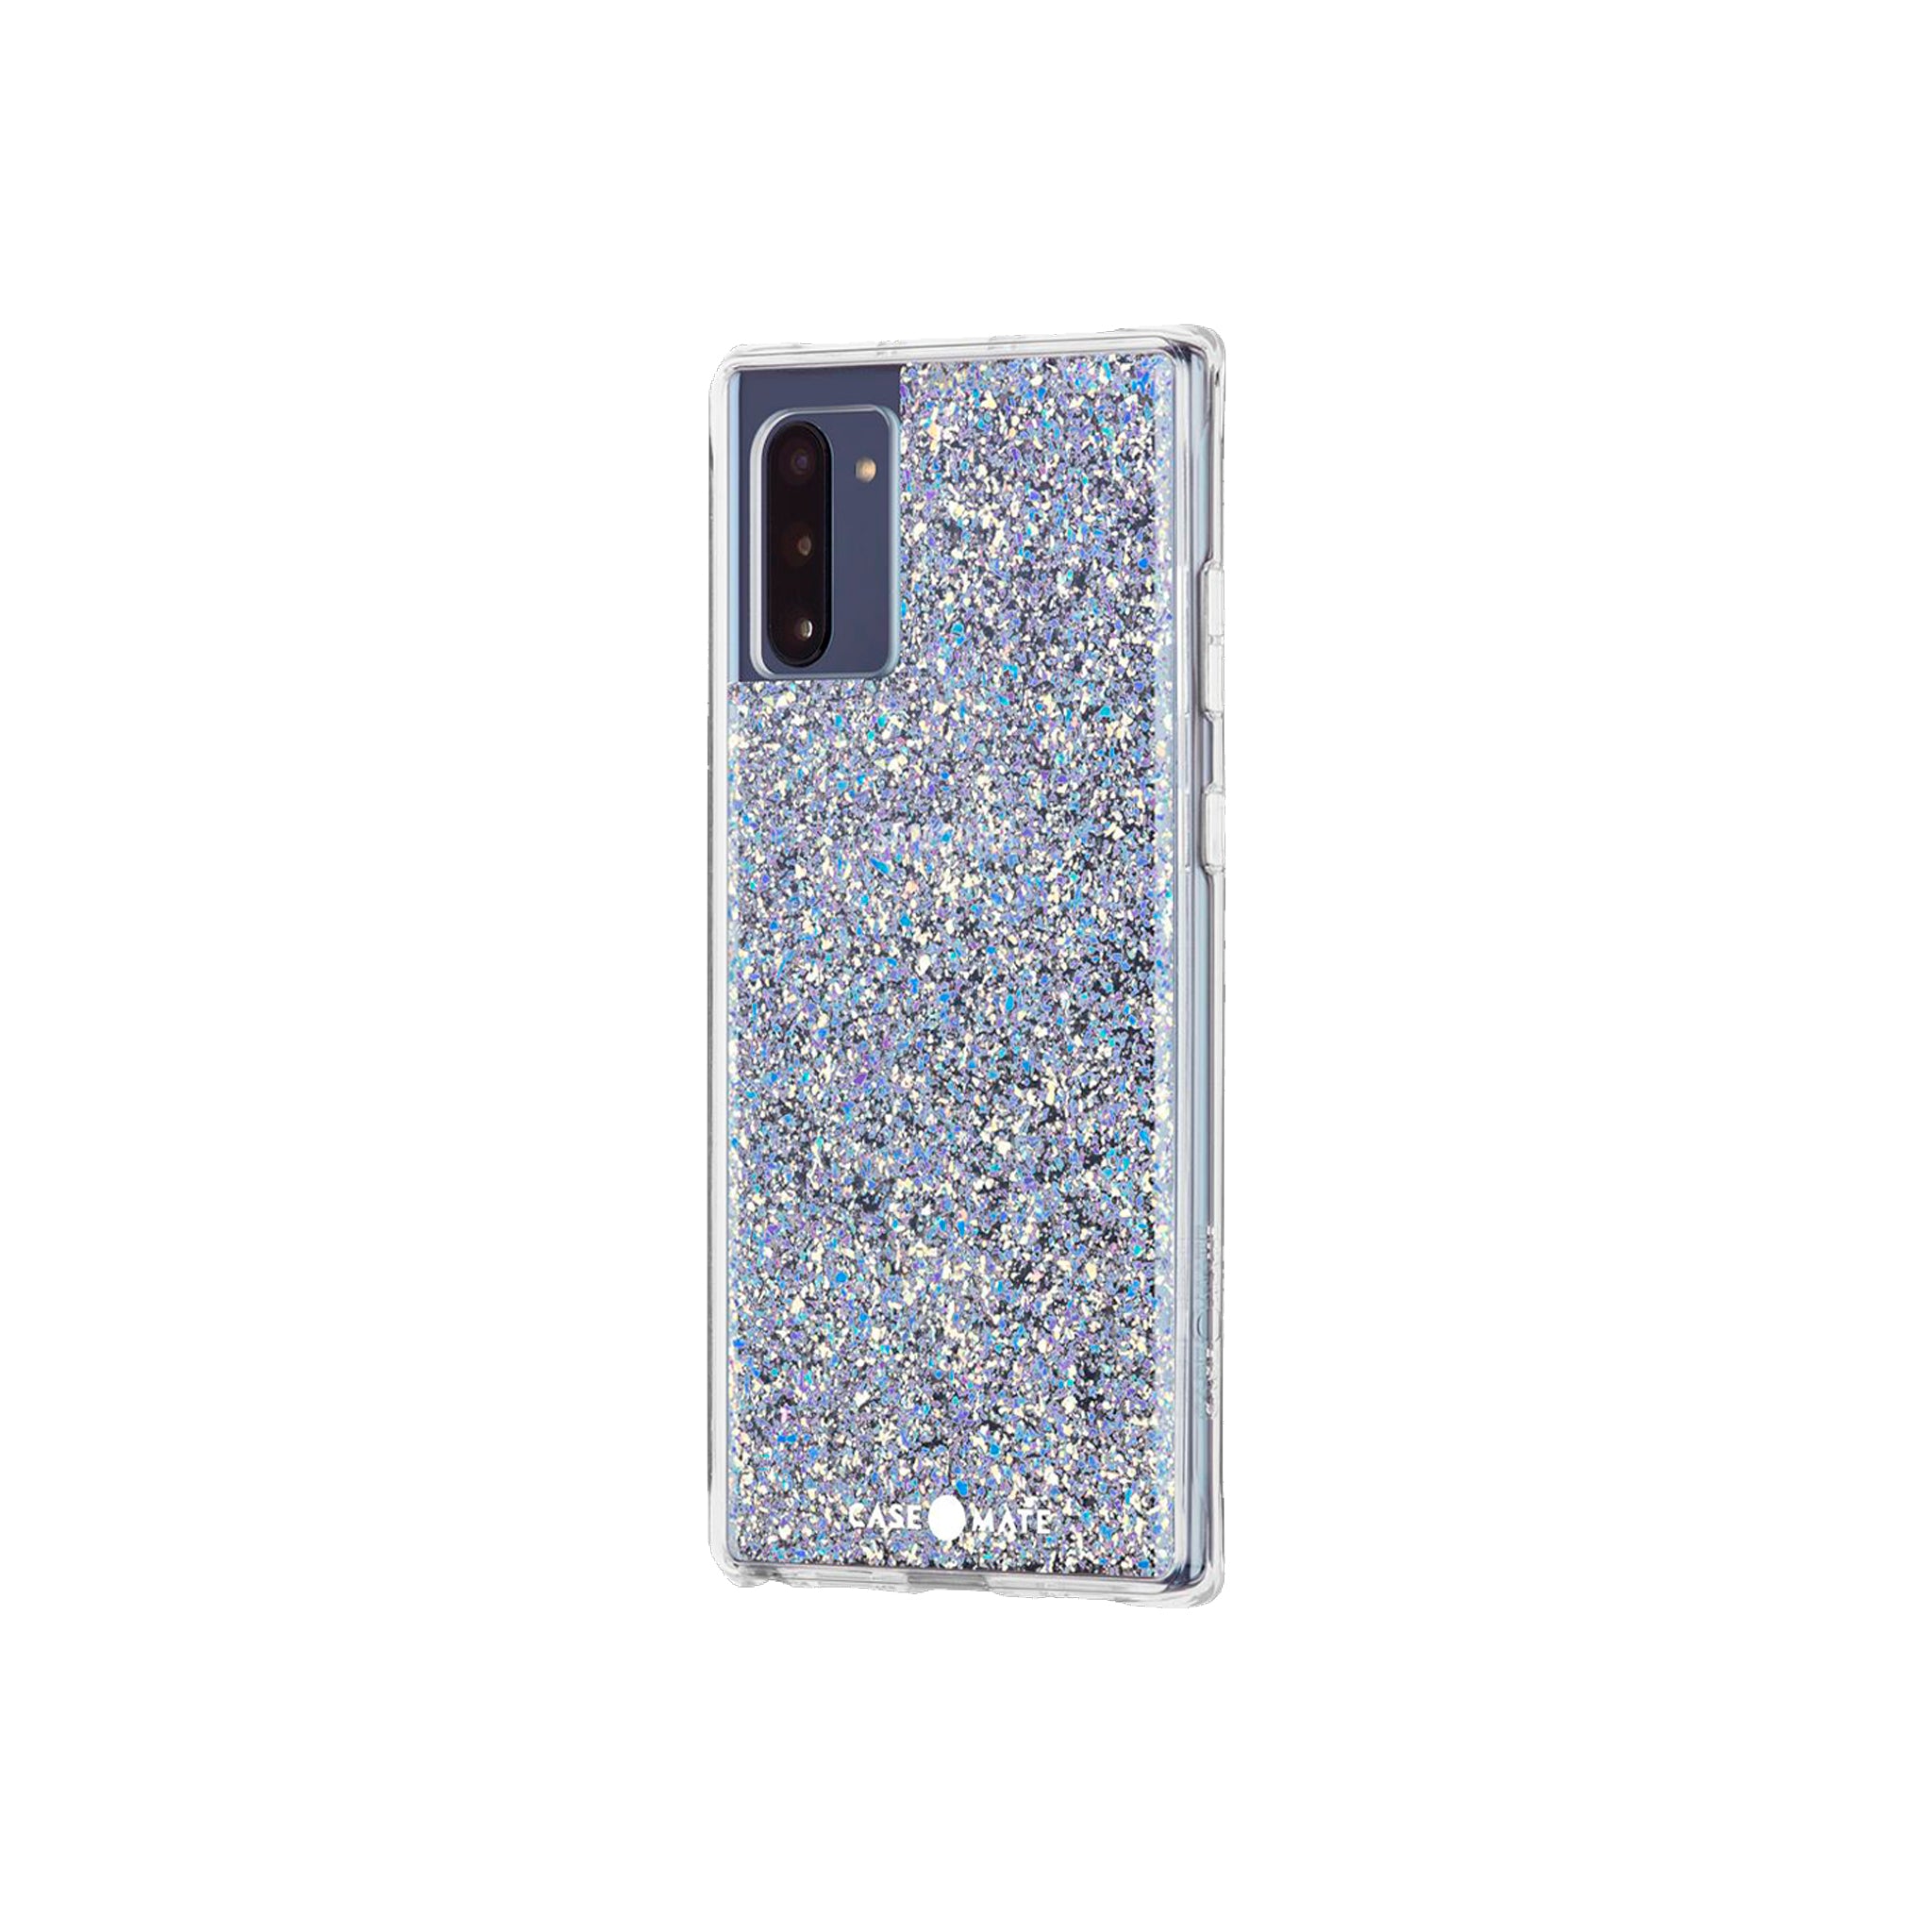 Case-mate - Twinkle Case For Samsung Galaxy Note 10 - Stardust